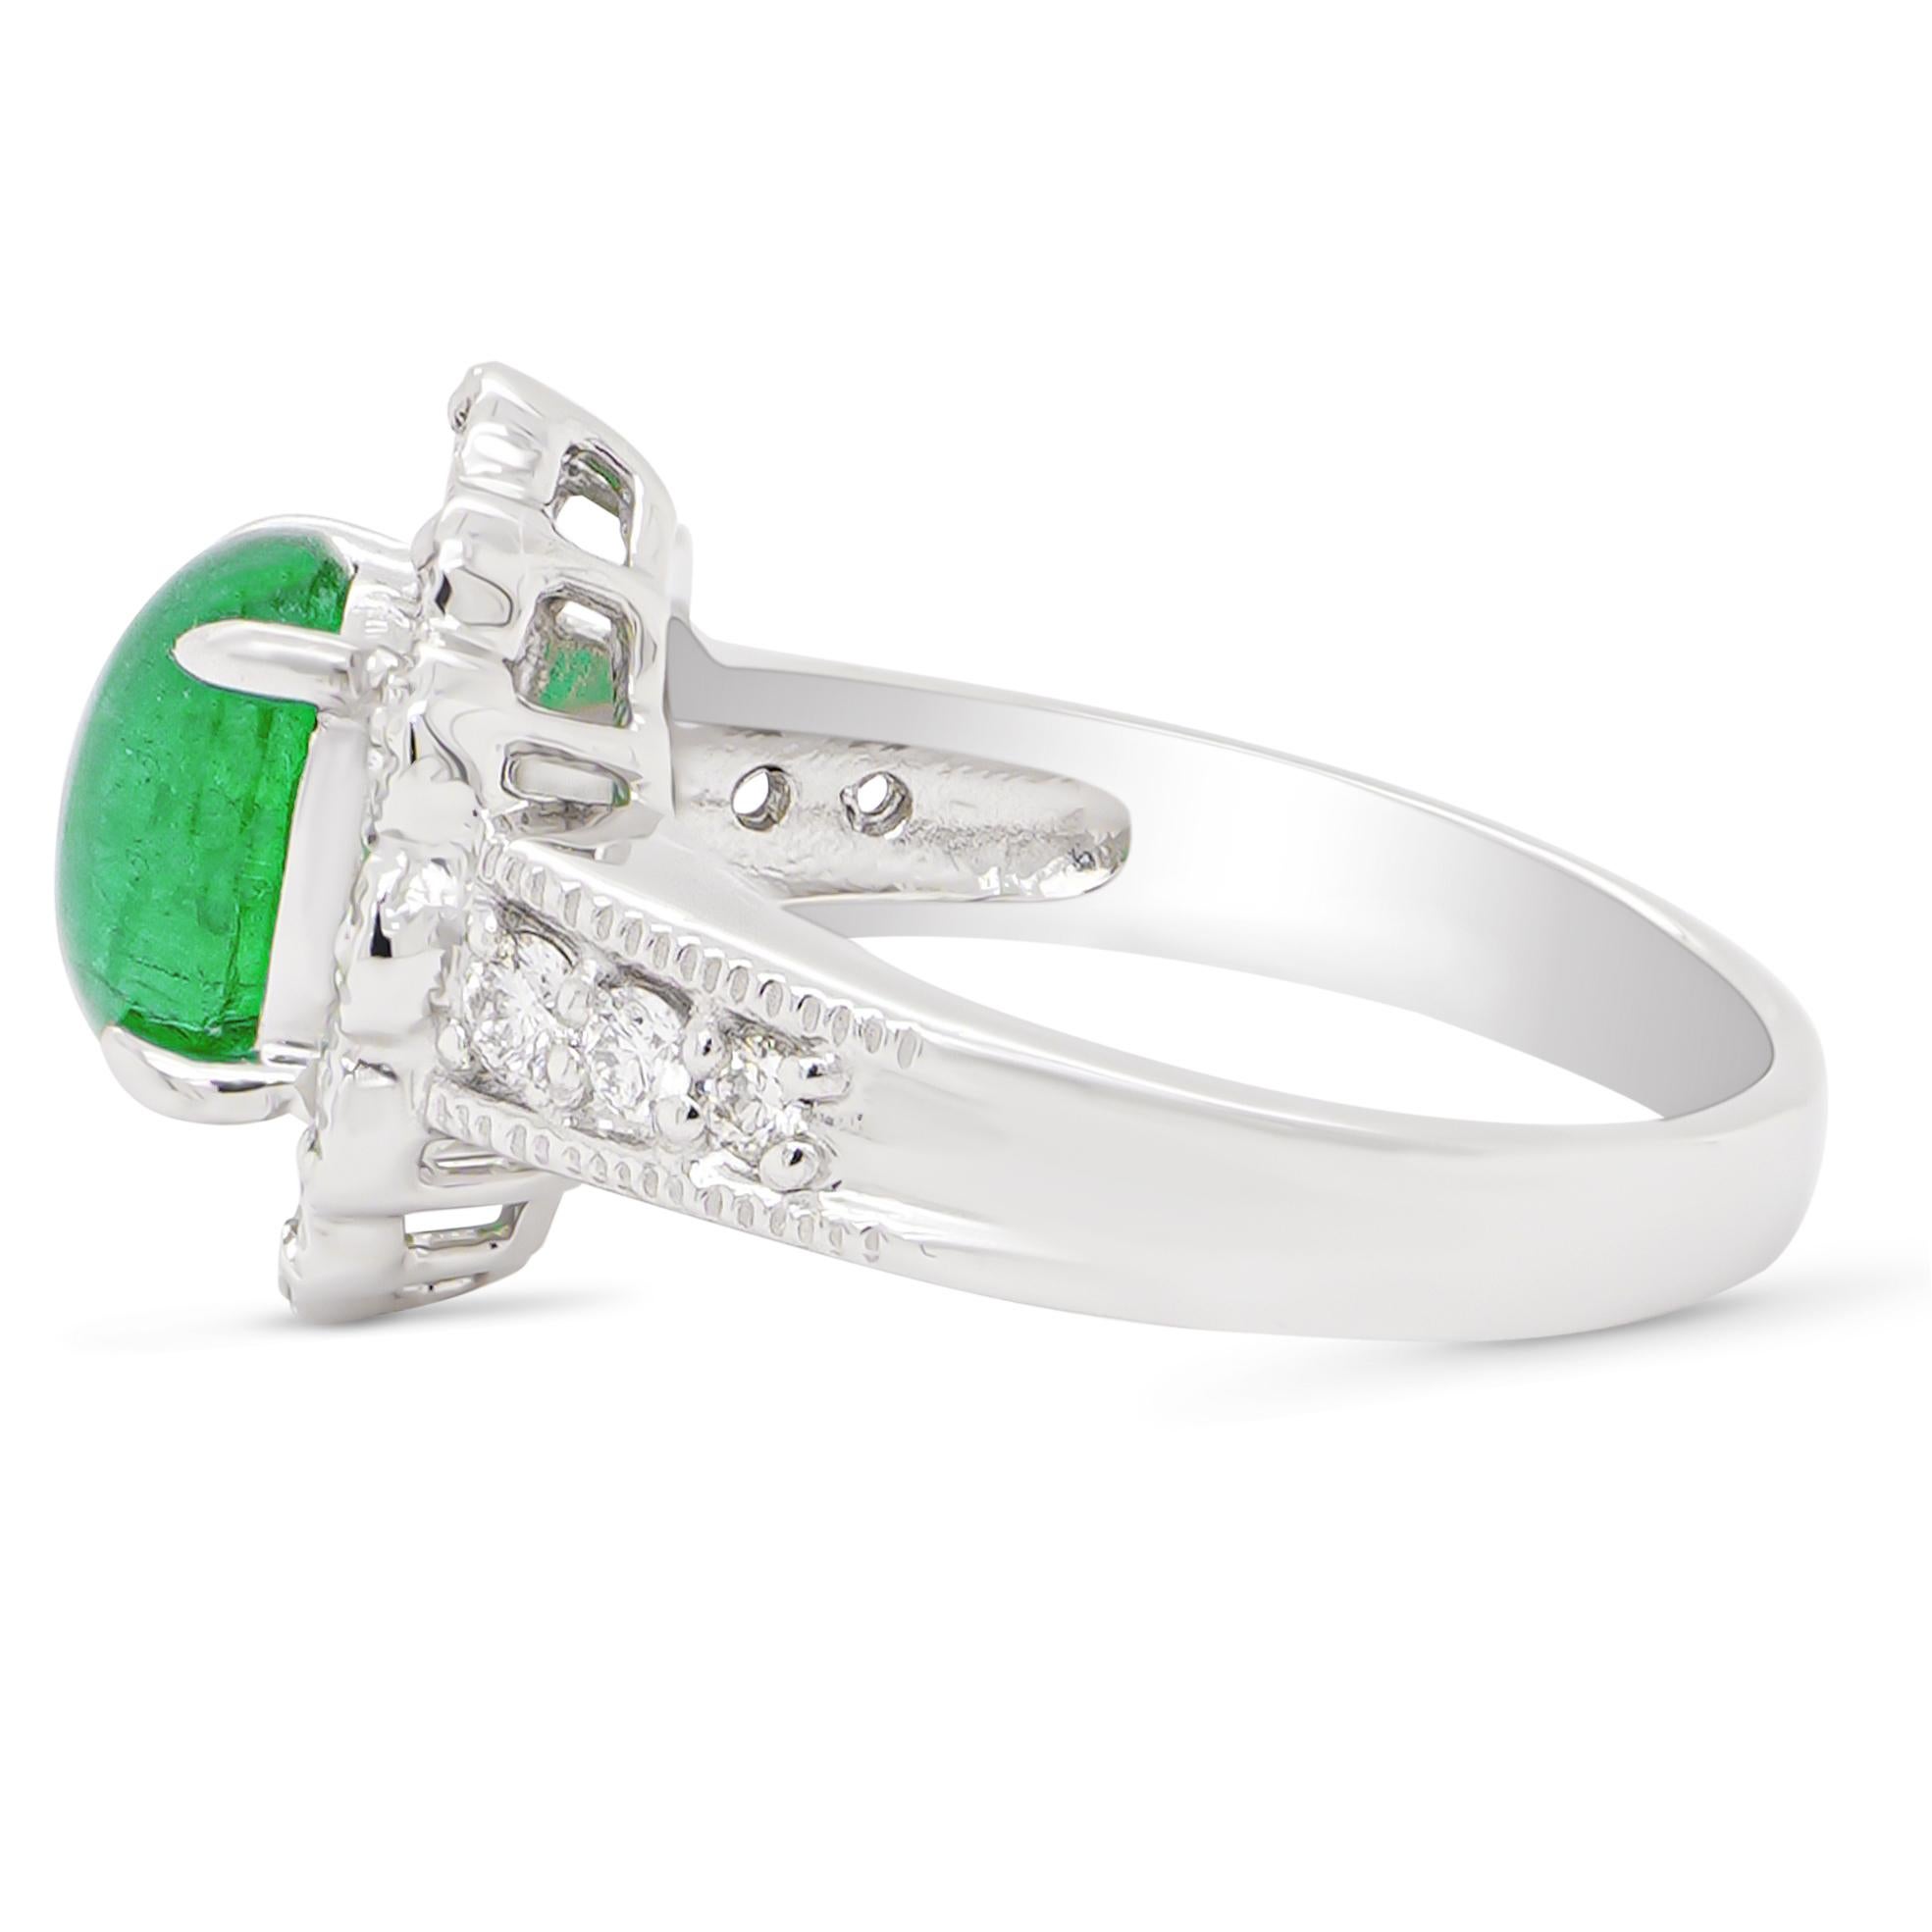 Oval Cut 1.82 Carat Colombian Emerald & 0.83 Carat White Diamond PT 900 Simple Ring For Sale